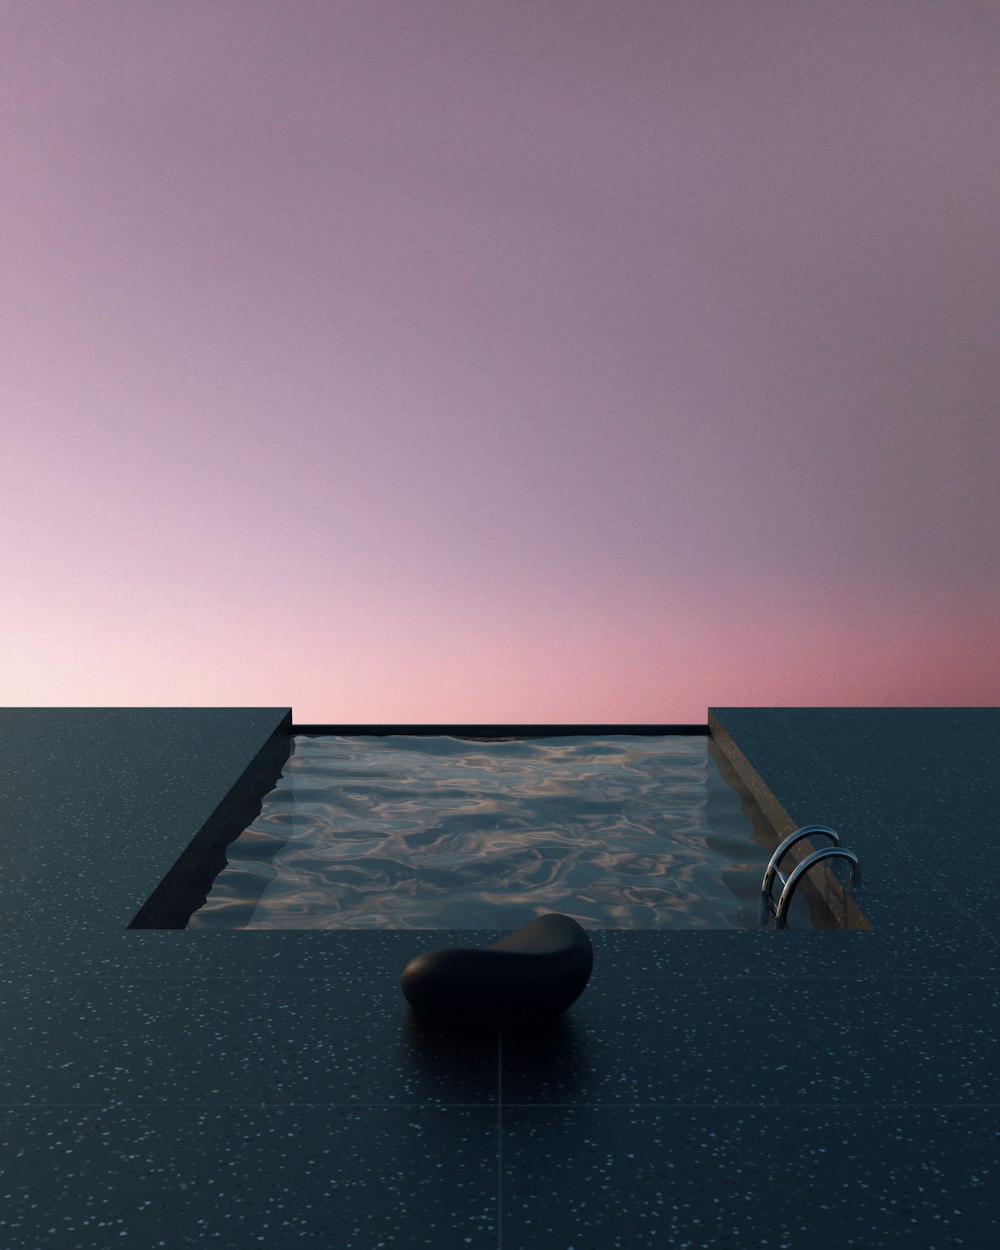 a black object floating in a pool of water